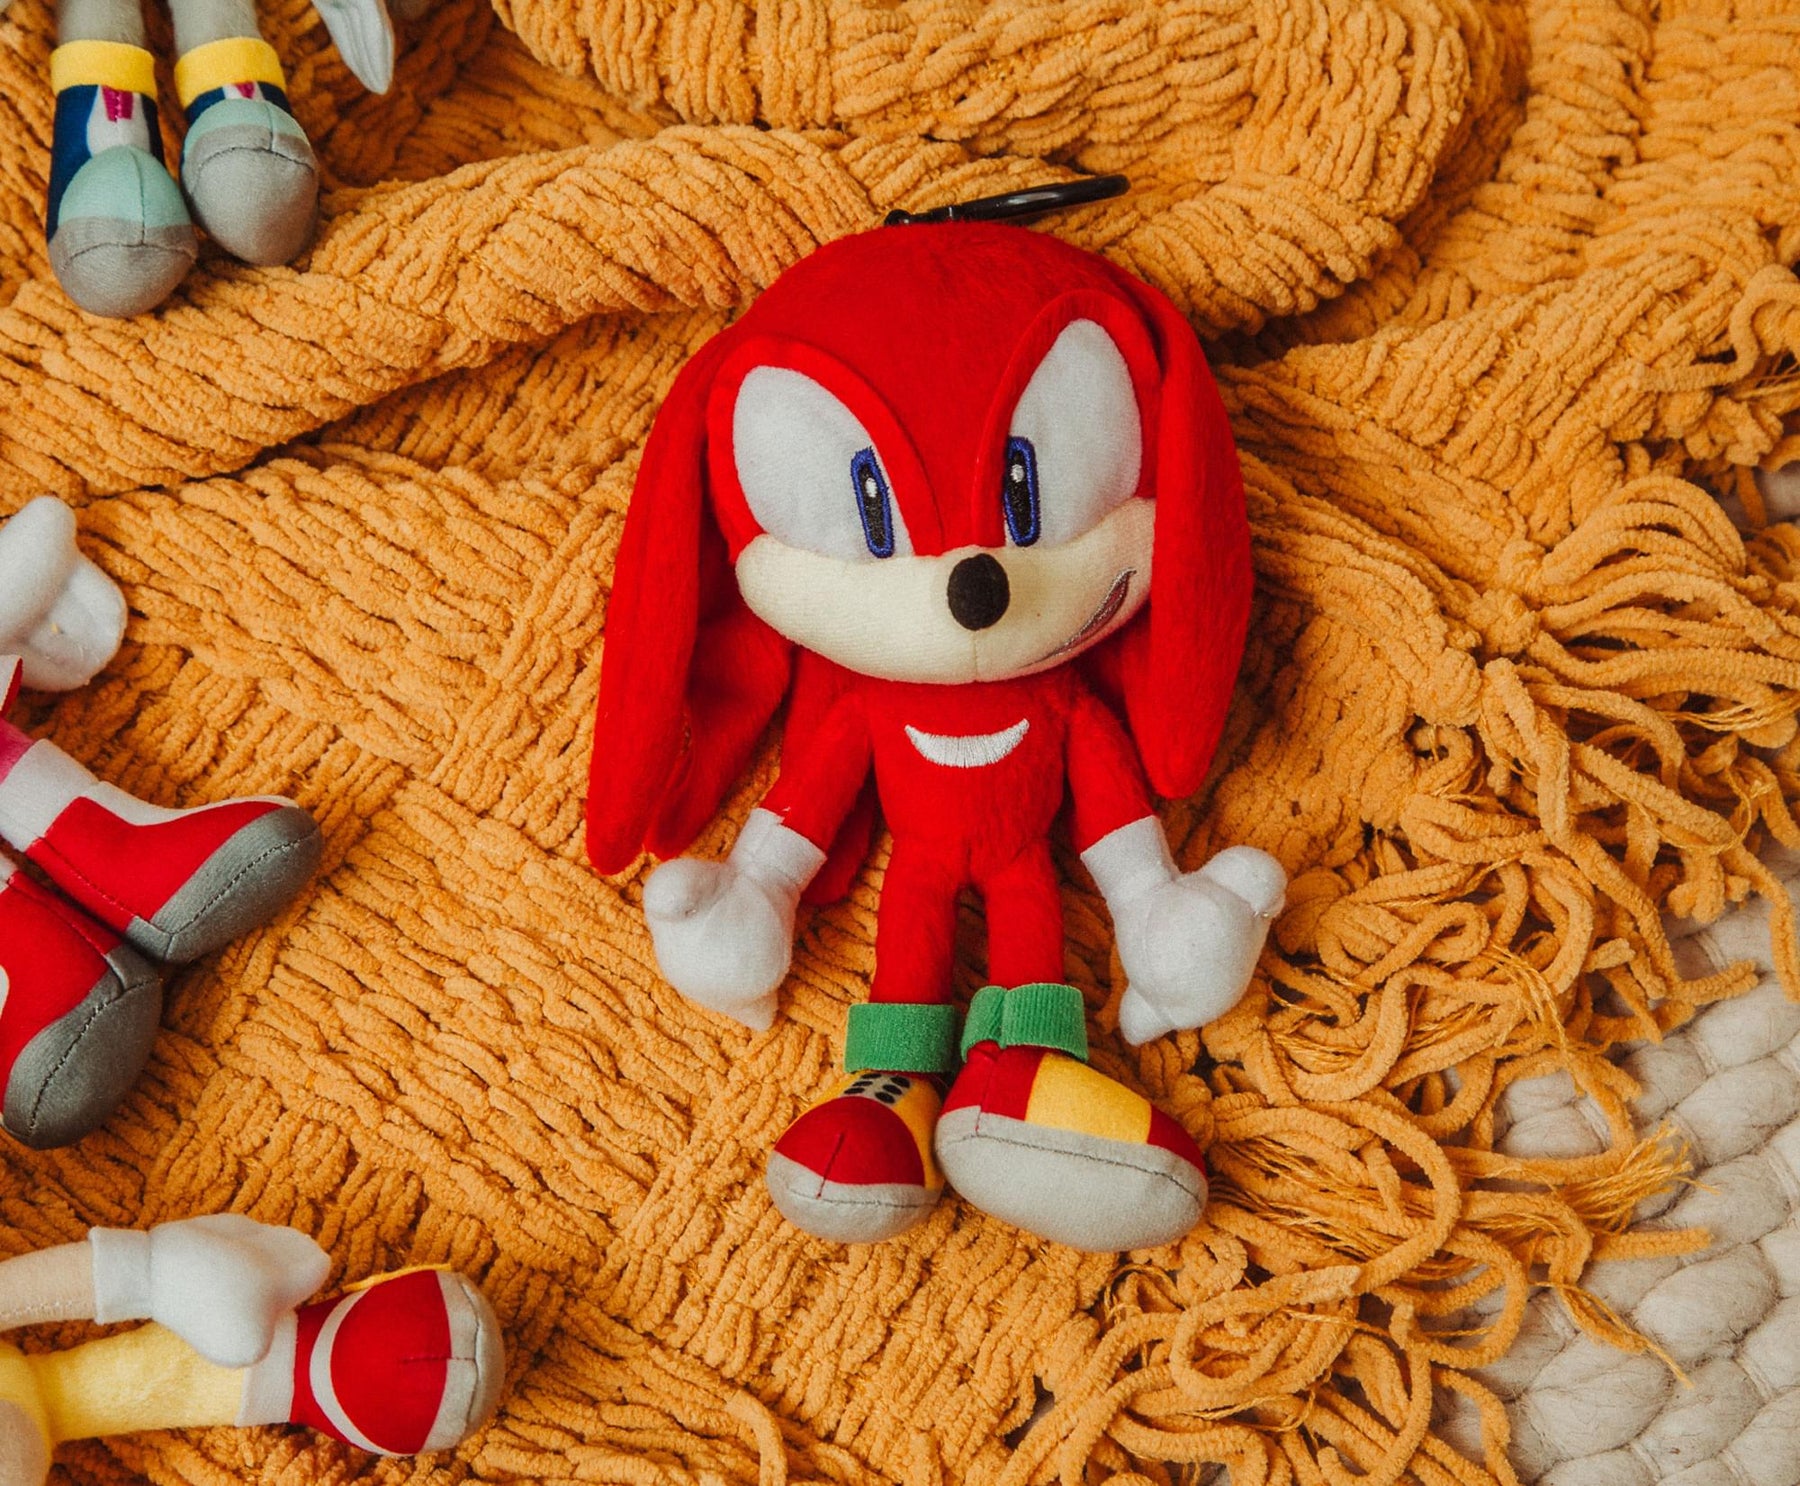 Sonic the Hedgehog 8-Inch Character Plush Toy | Knuckles the Echidna